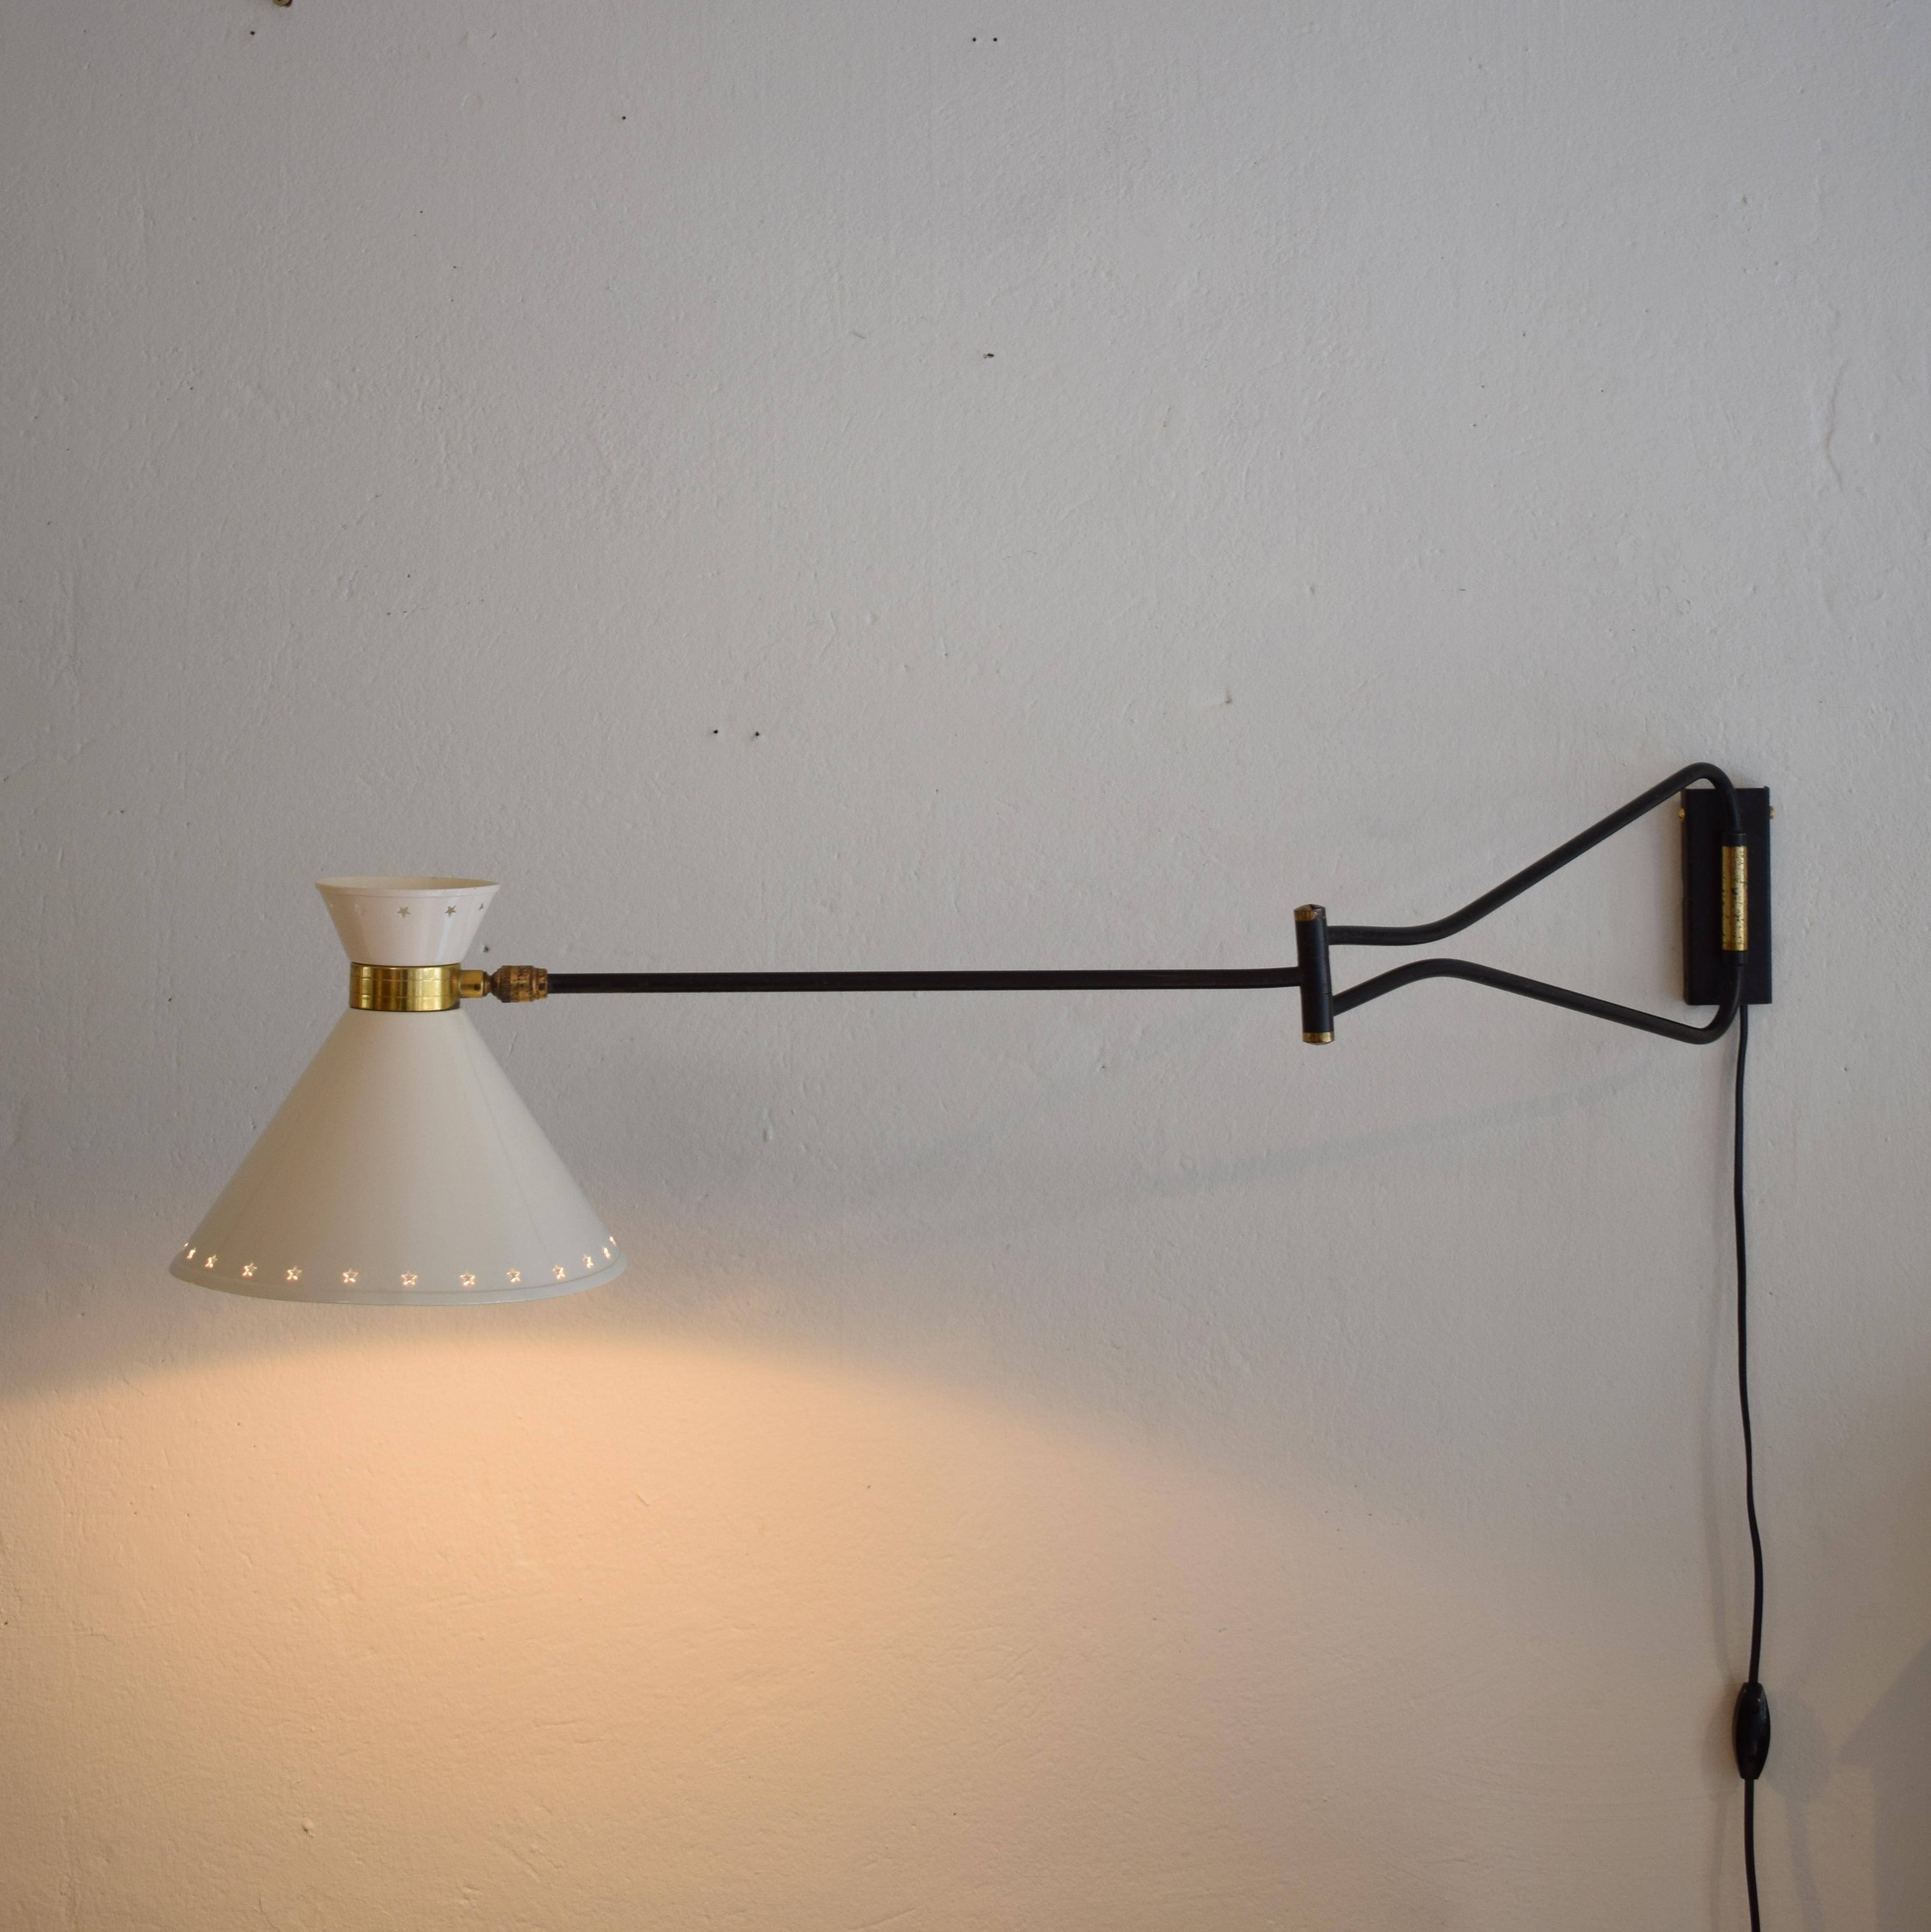 French Midcentury Creme Swing Arm Wall Light Lamp by Rene Mathieu / Lunel, 1950 1